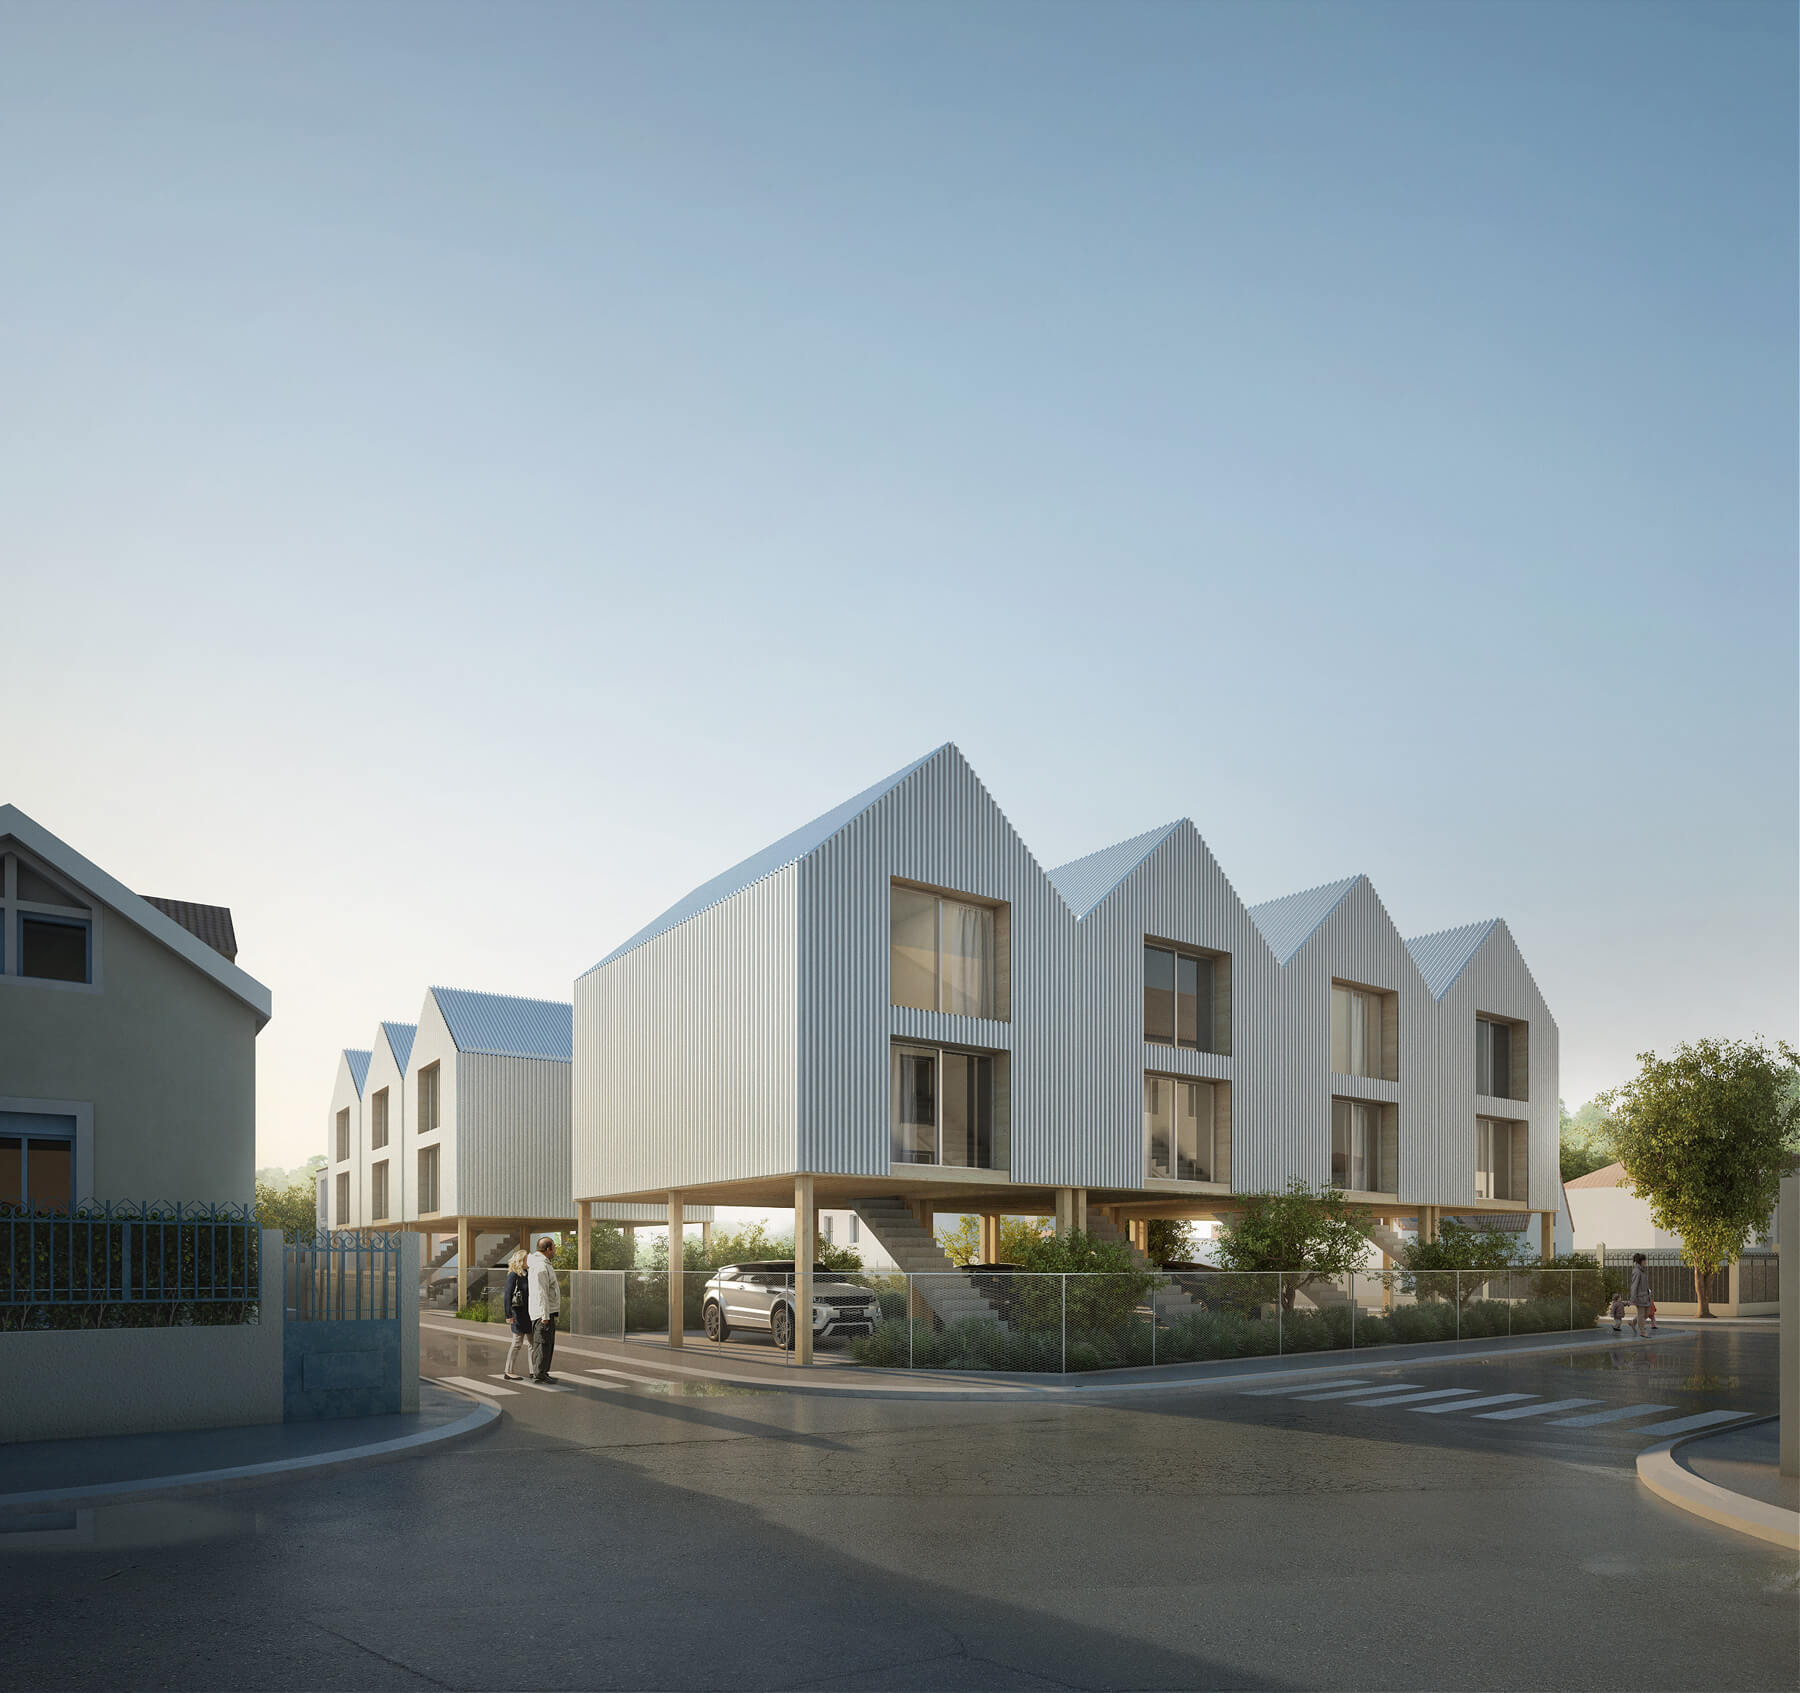 GFC architecture - 7 dwellings